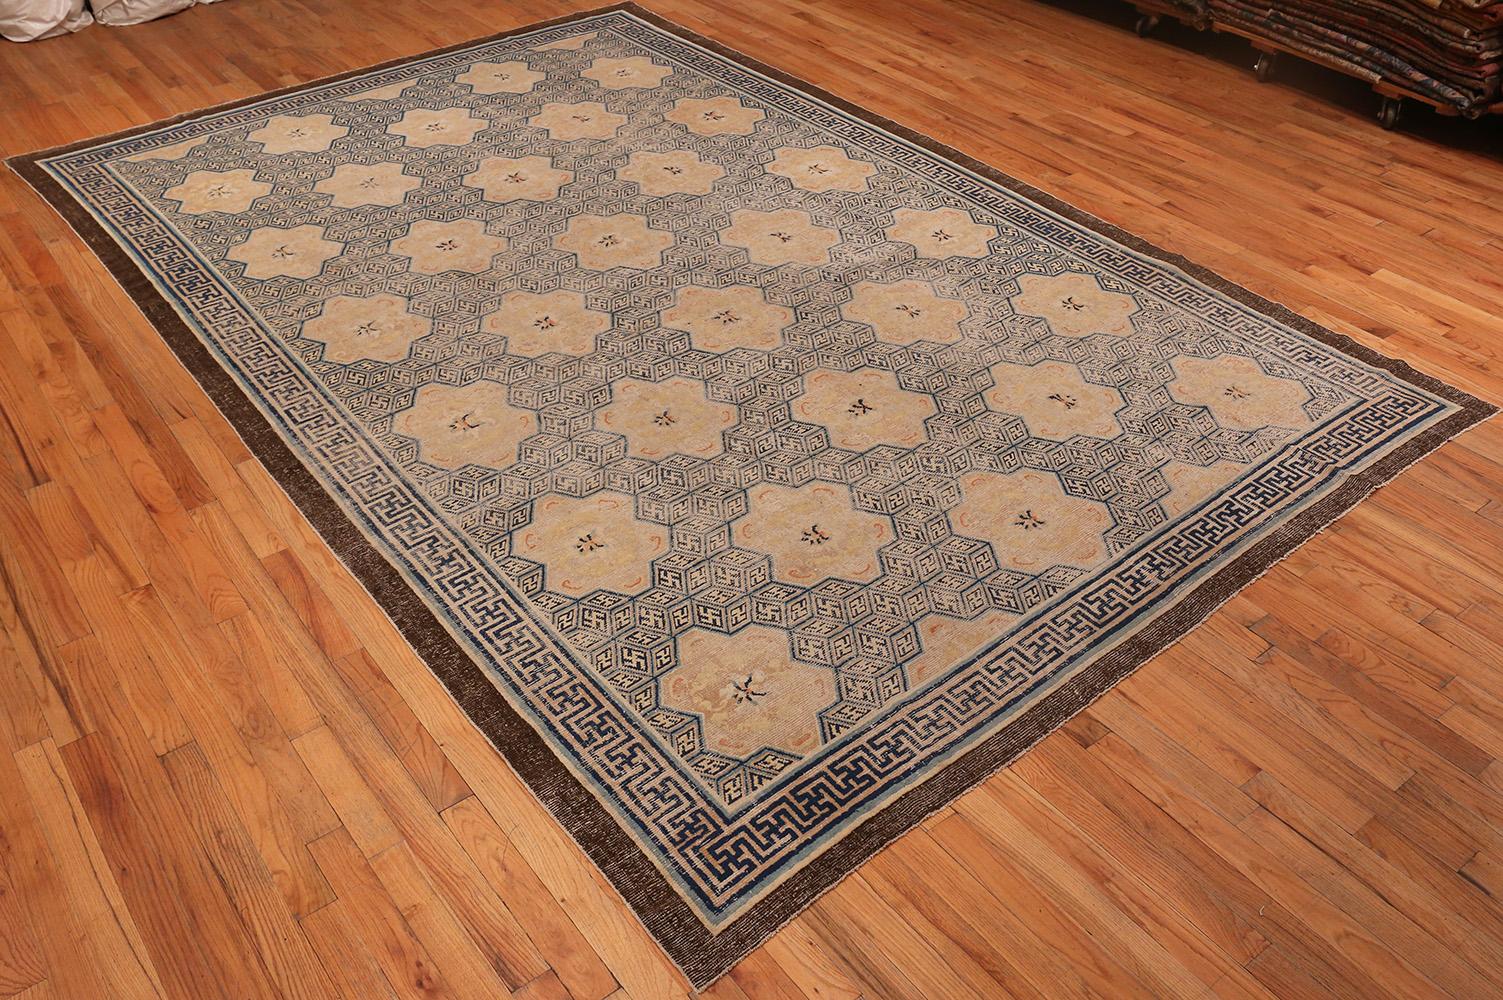 Hand-Knotted Rare Antique 17th Century Chinese Ningxia Carpet